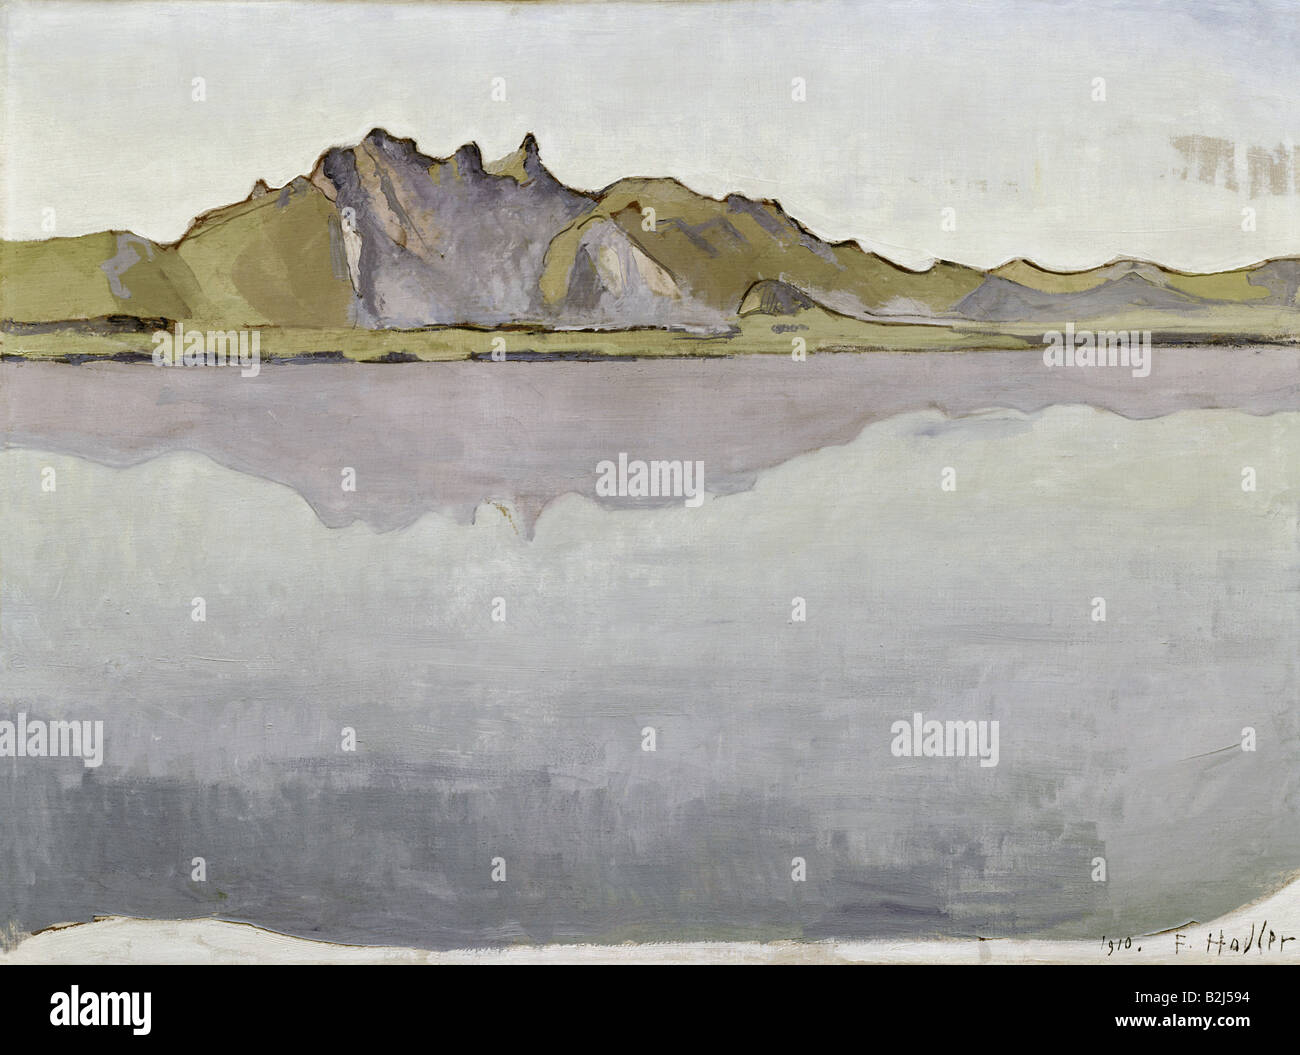 fine arts, Hodler, Ferdinand, (1853 - 1918), painting, 'Thunersee mit Stockhornkette', 'lake Thun with Stockhorn mountain range', 1910, oil on canvas, 88 cm x 66 cm, communal arts gallery, Mannheim, Germany, Artist's Copyright has not to be cleared Stock Photo